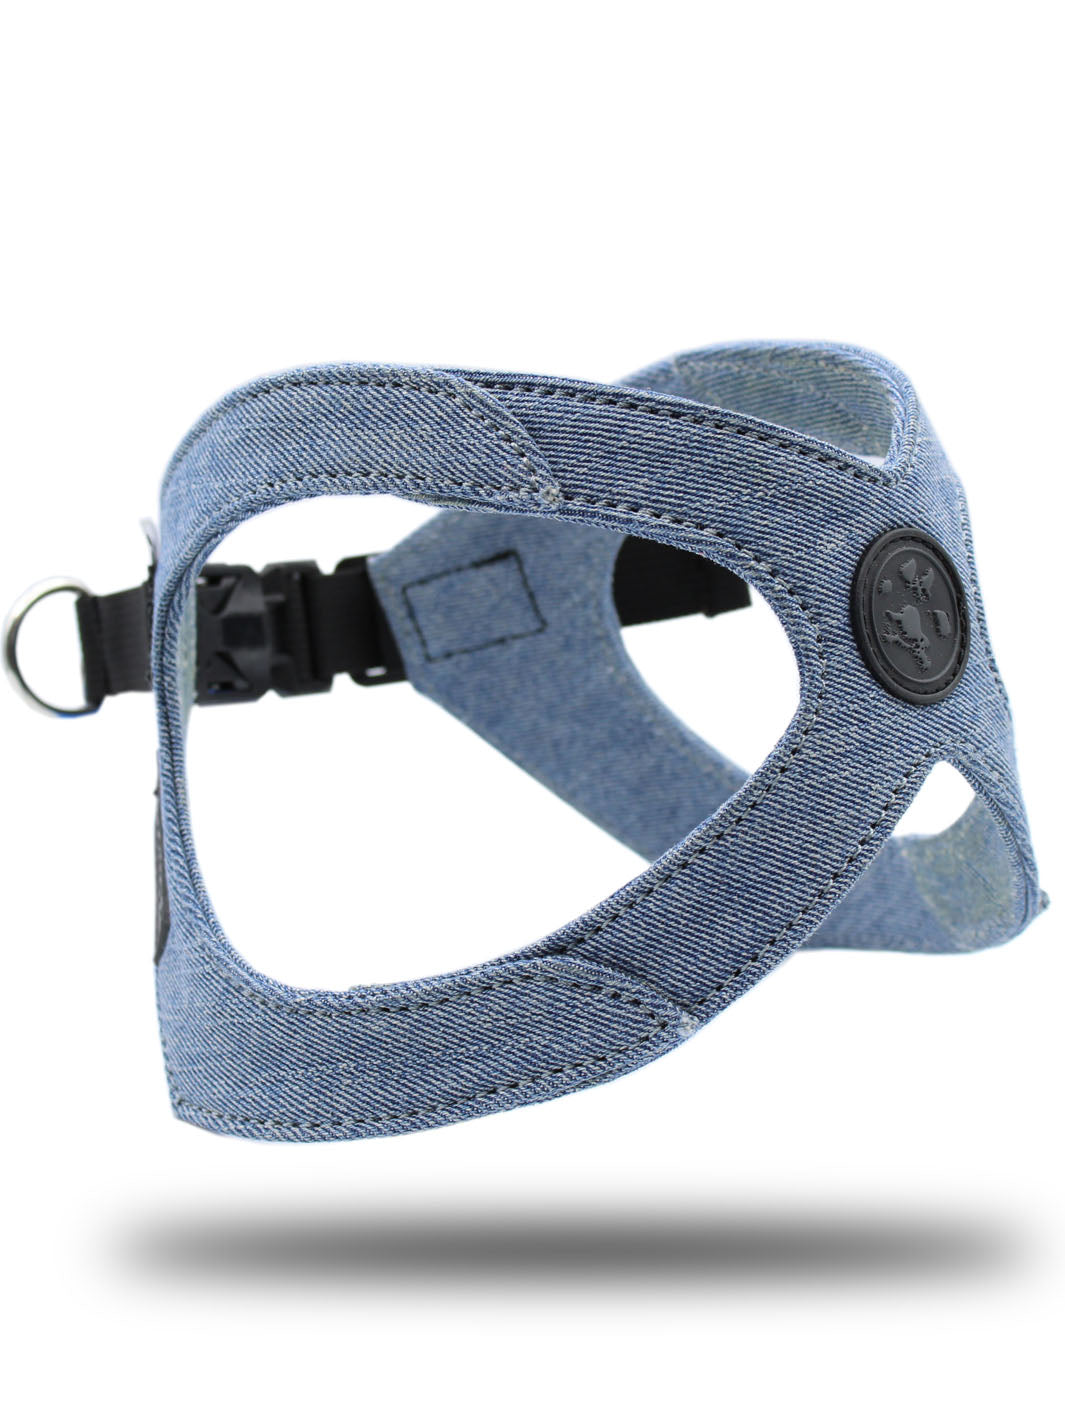 MAGNUS Canis custom made blue denim dog harness floats above the ground against a white back drop..